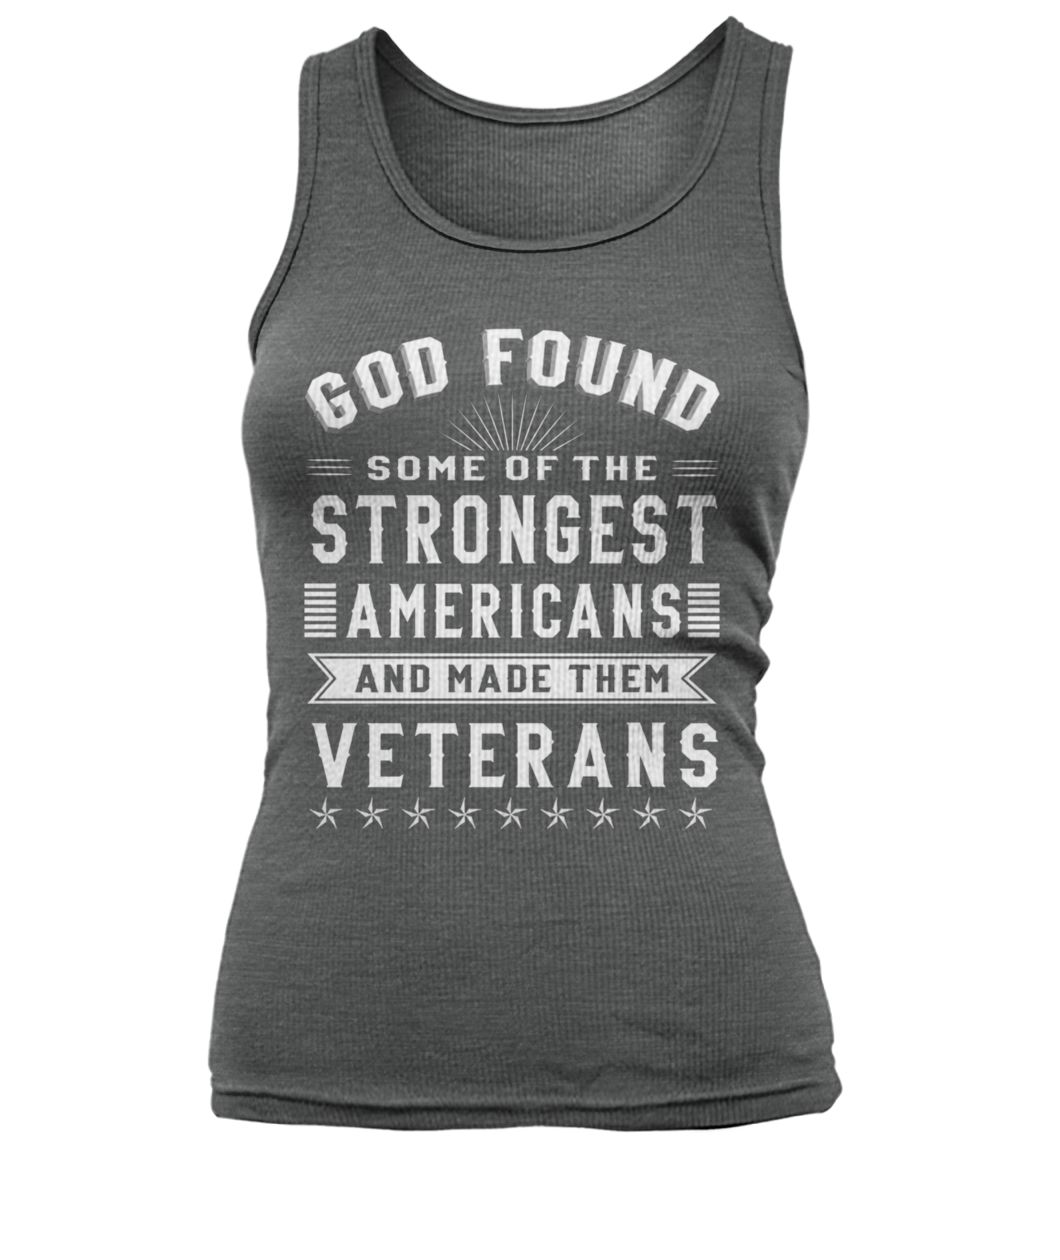 God found some of the strongest americans and made them veterans women's tank top